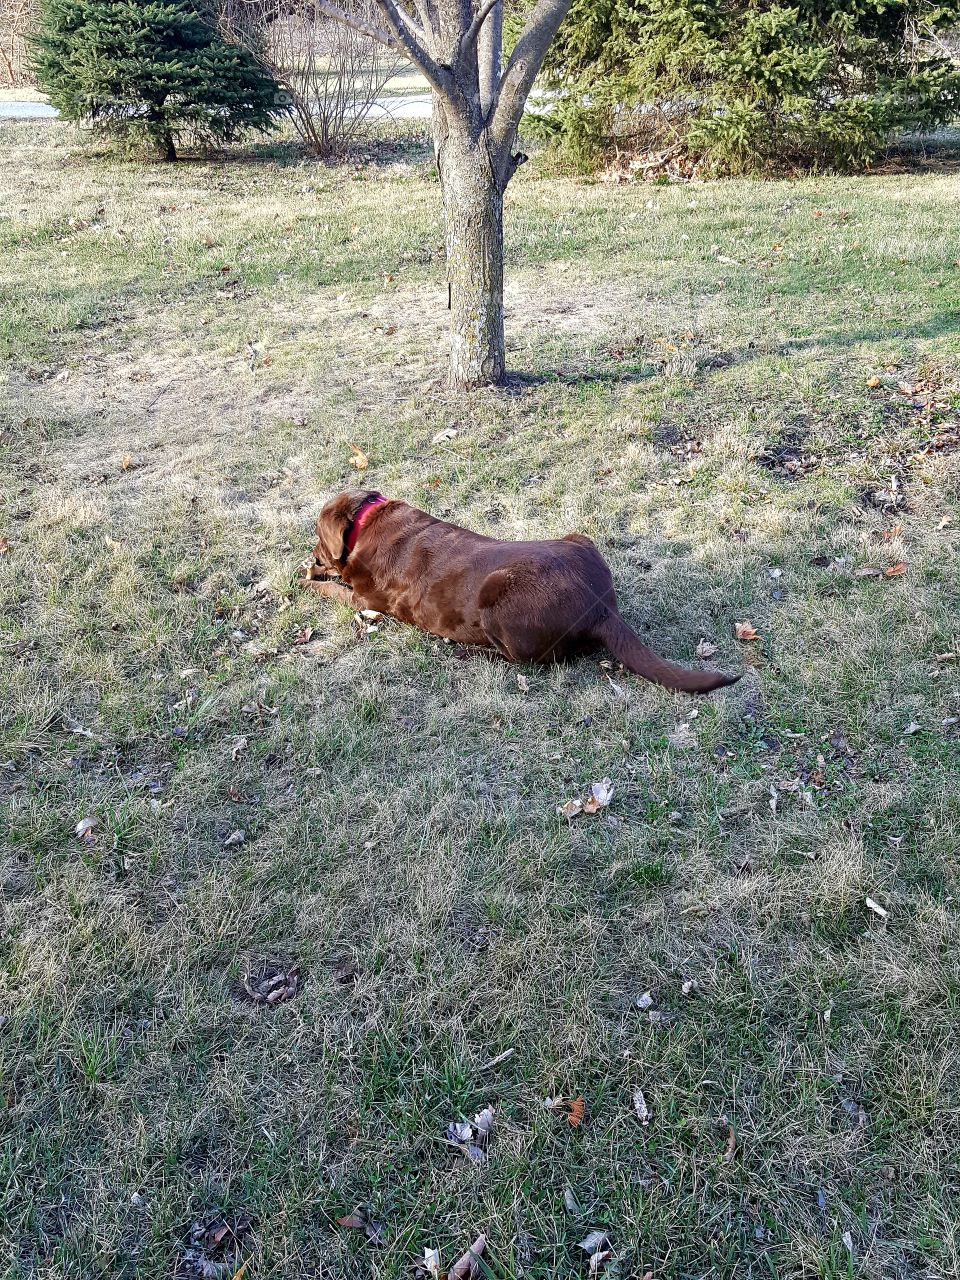 Our chocolate lab Mocha is getting old but she still loves to play!